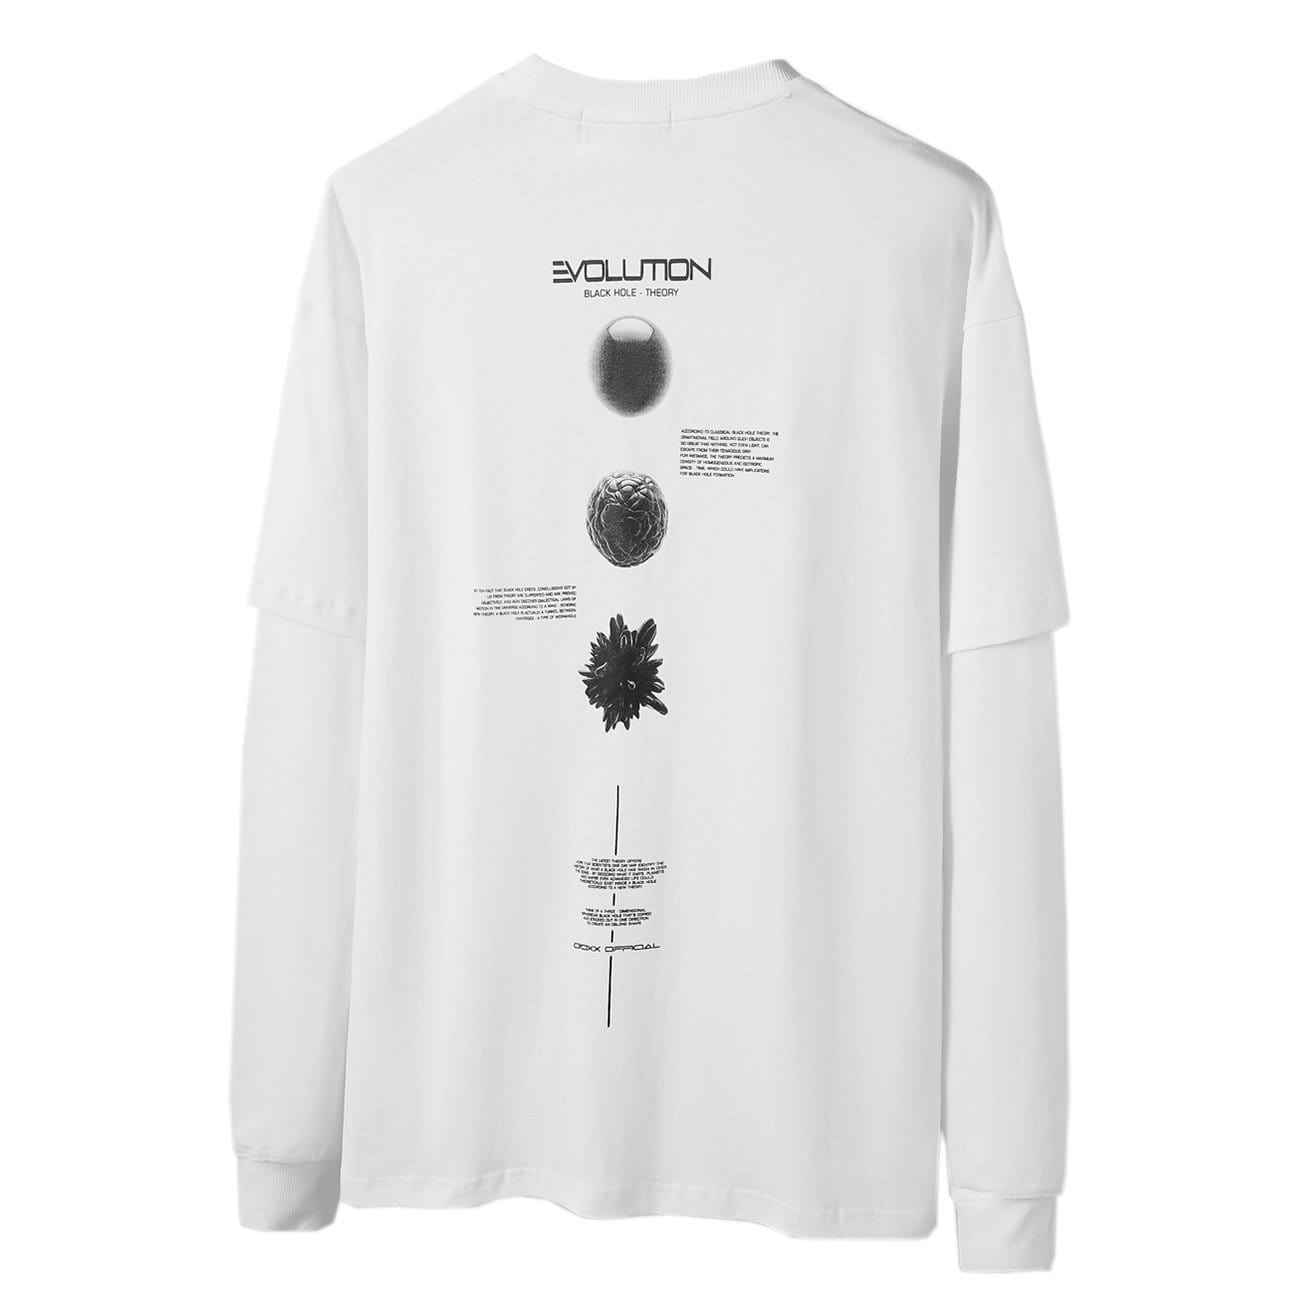 TO Double Cell Evolution Print Sweatshirt